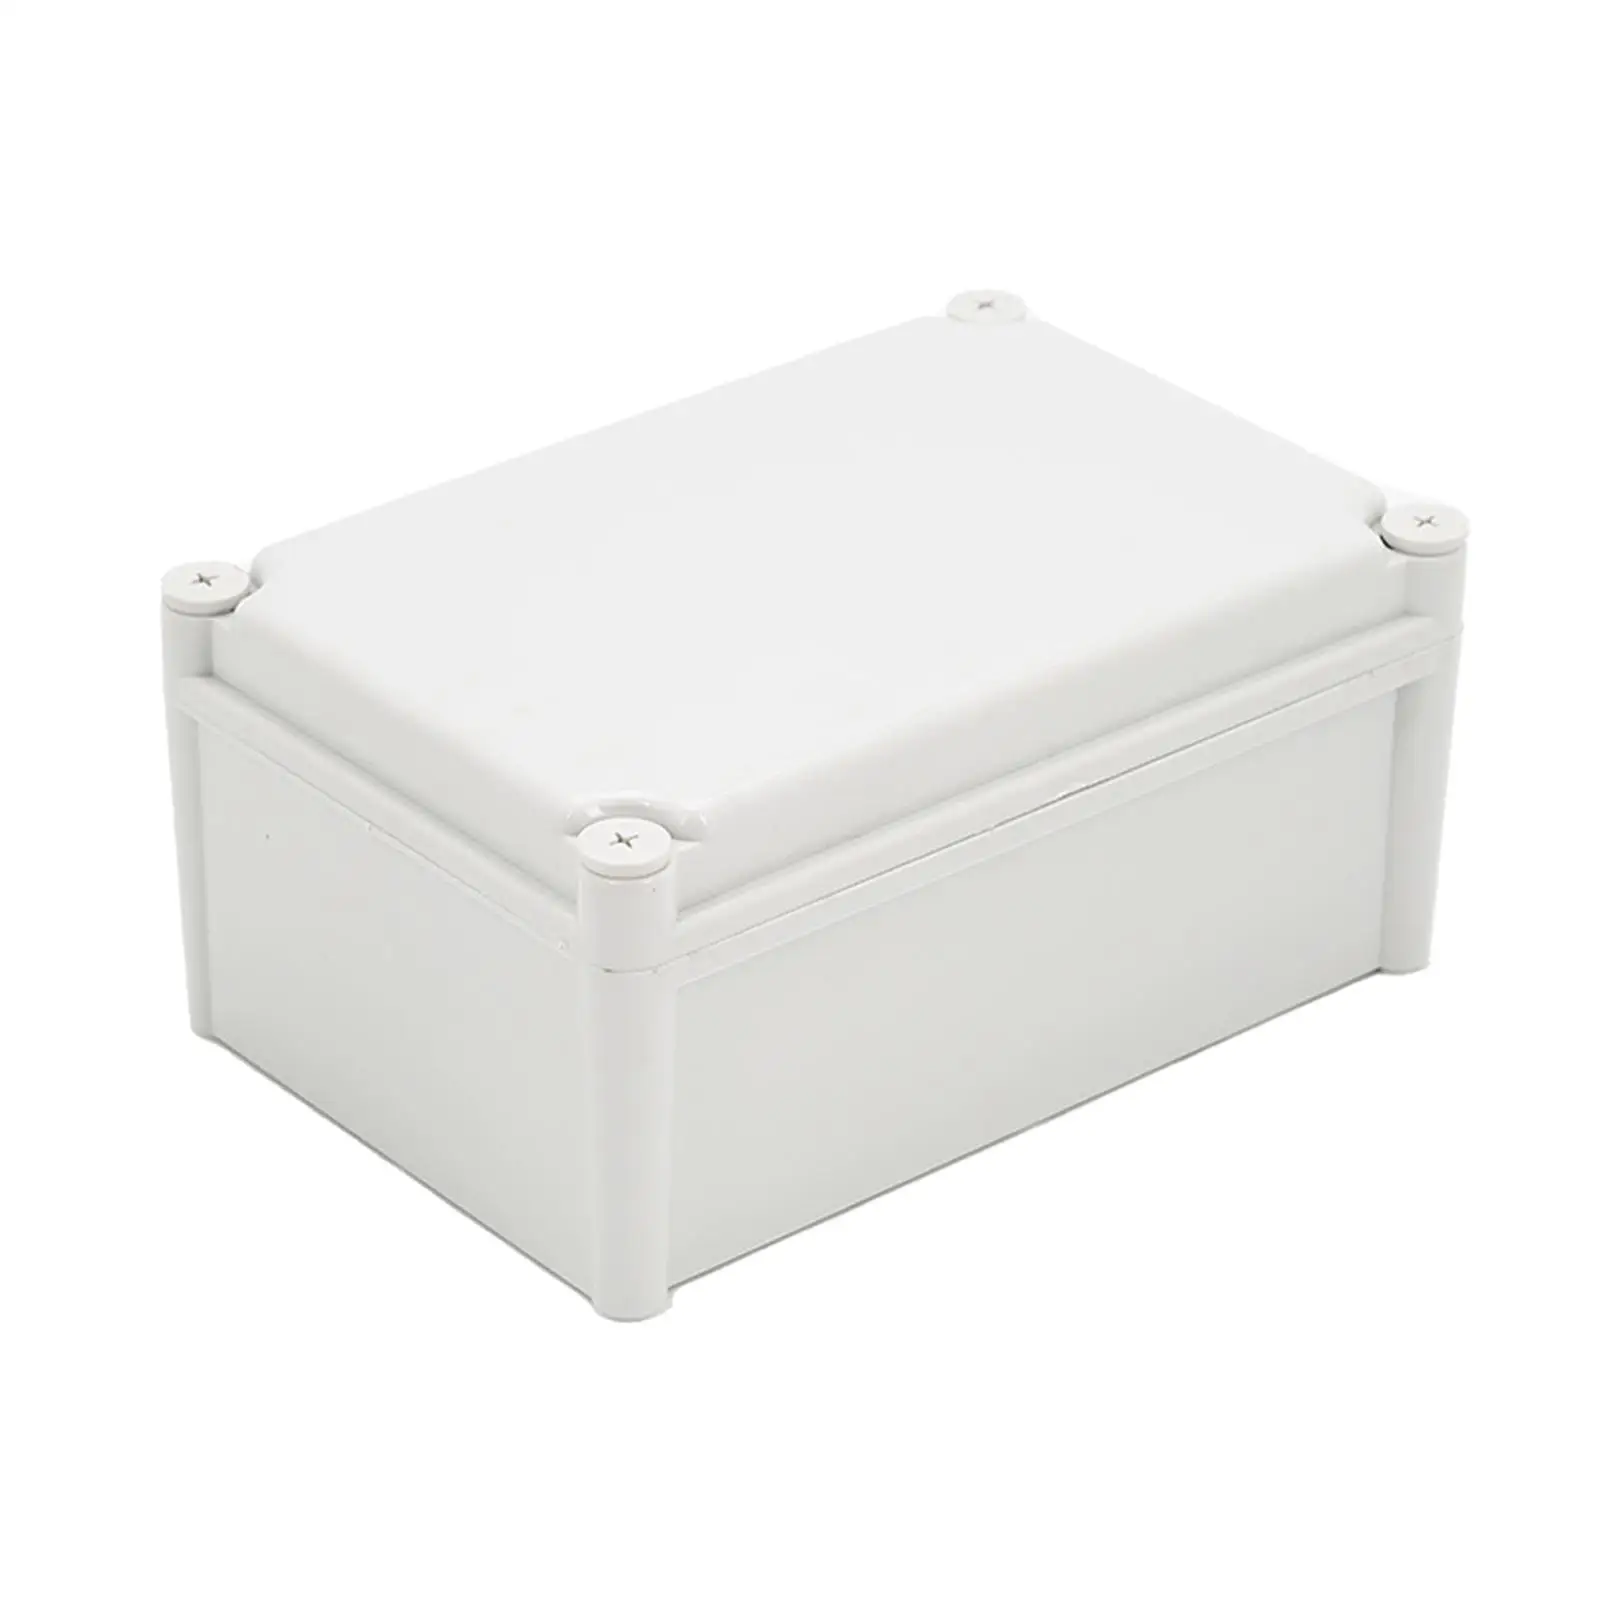 Electrical Project Case Project Enclosure 28x19x13cm IP67 Waterproof Electronic Cases Electrical Junction Box Projects Box